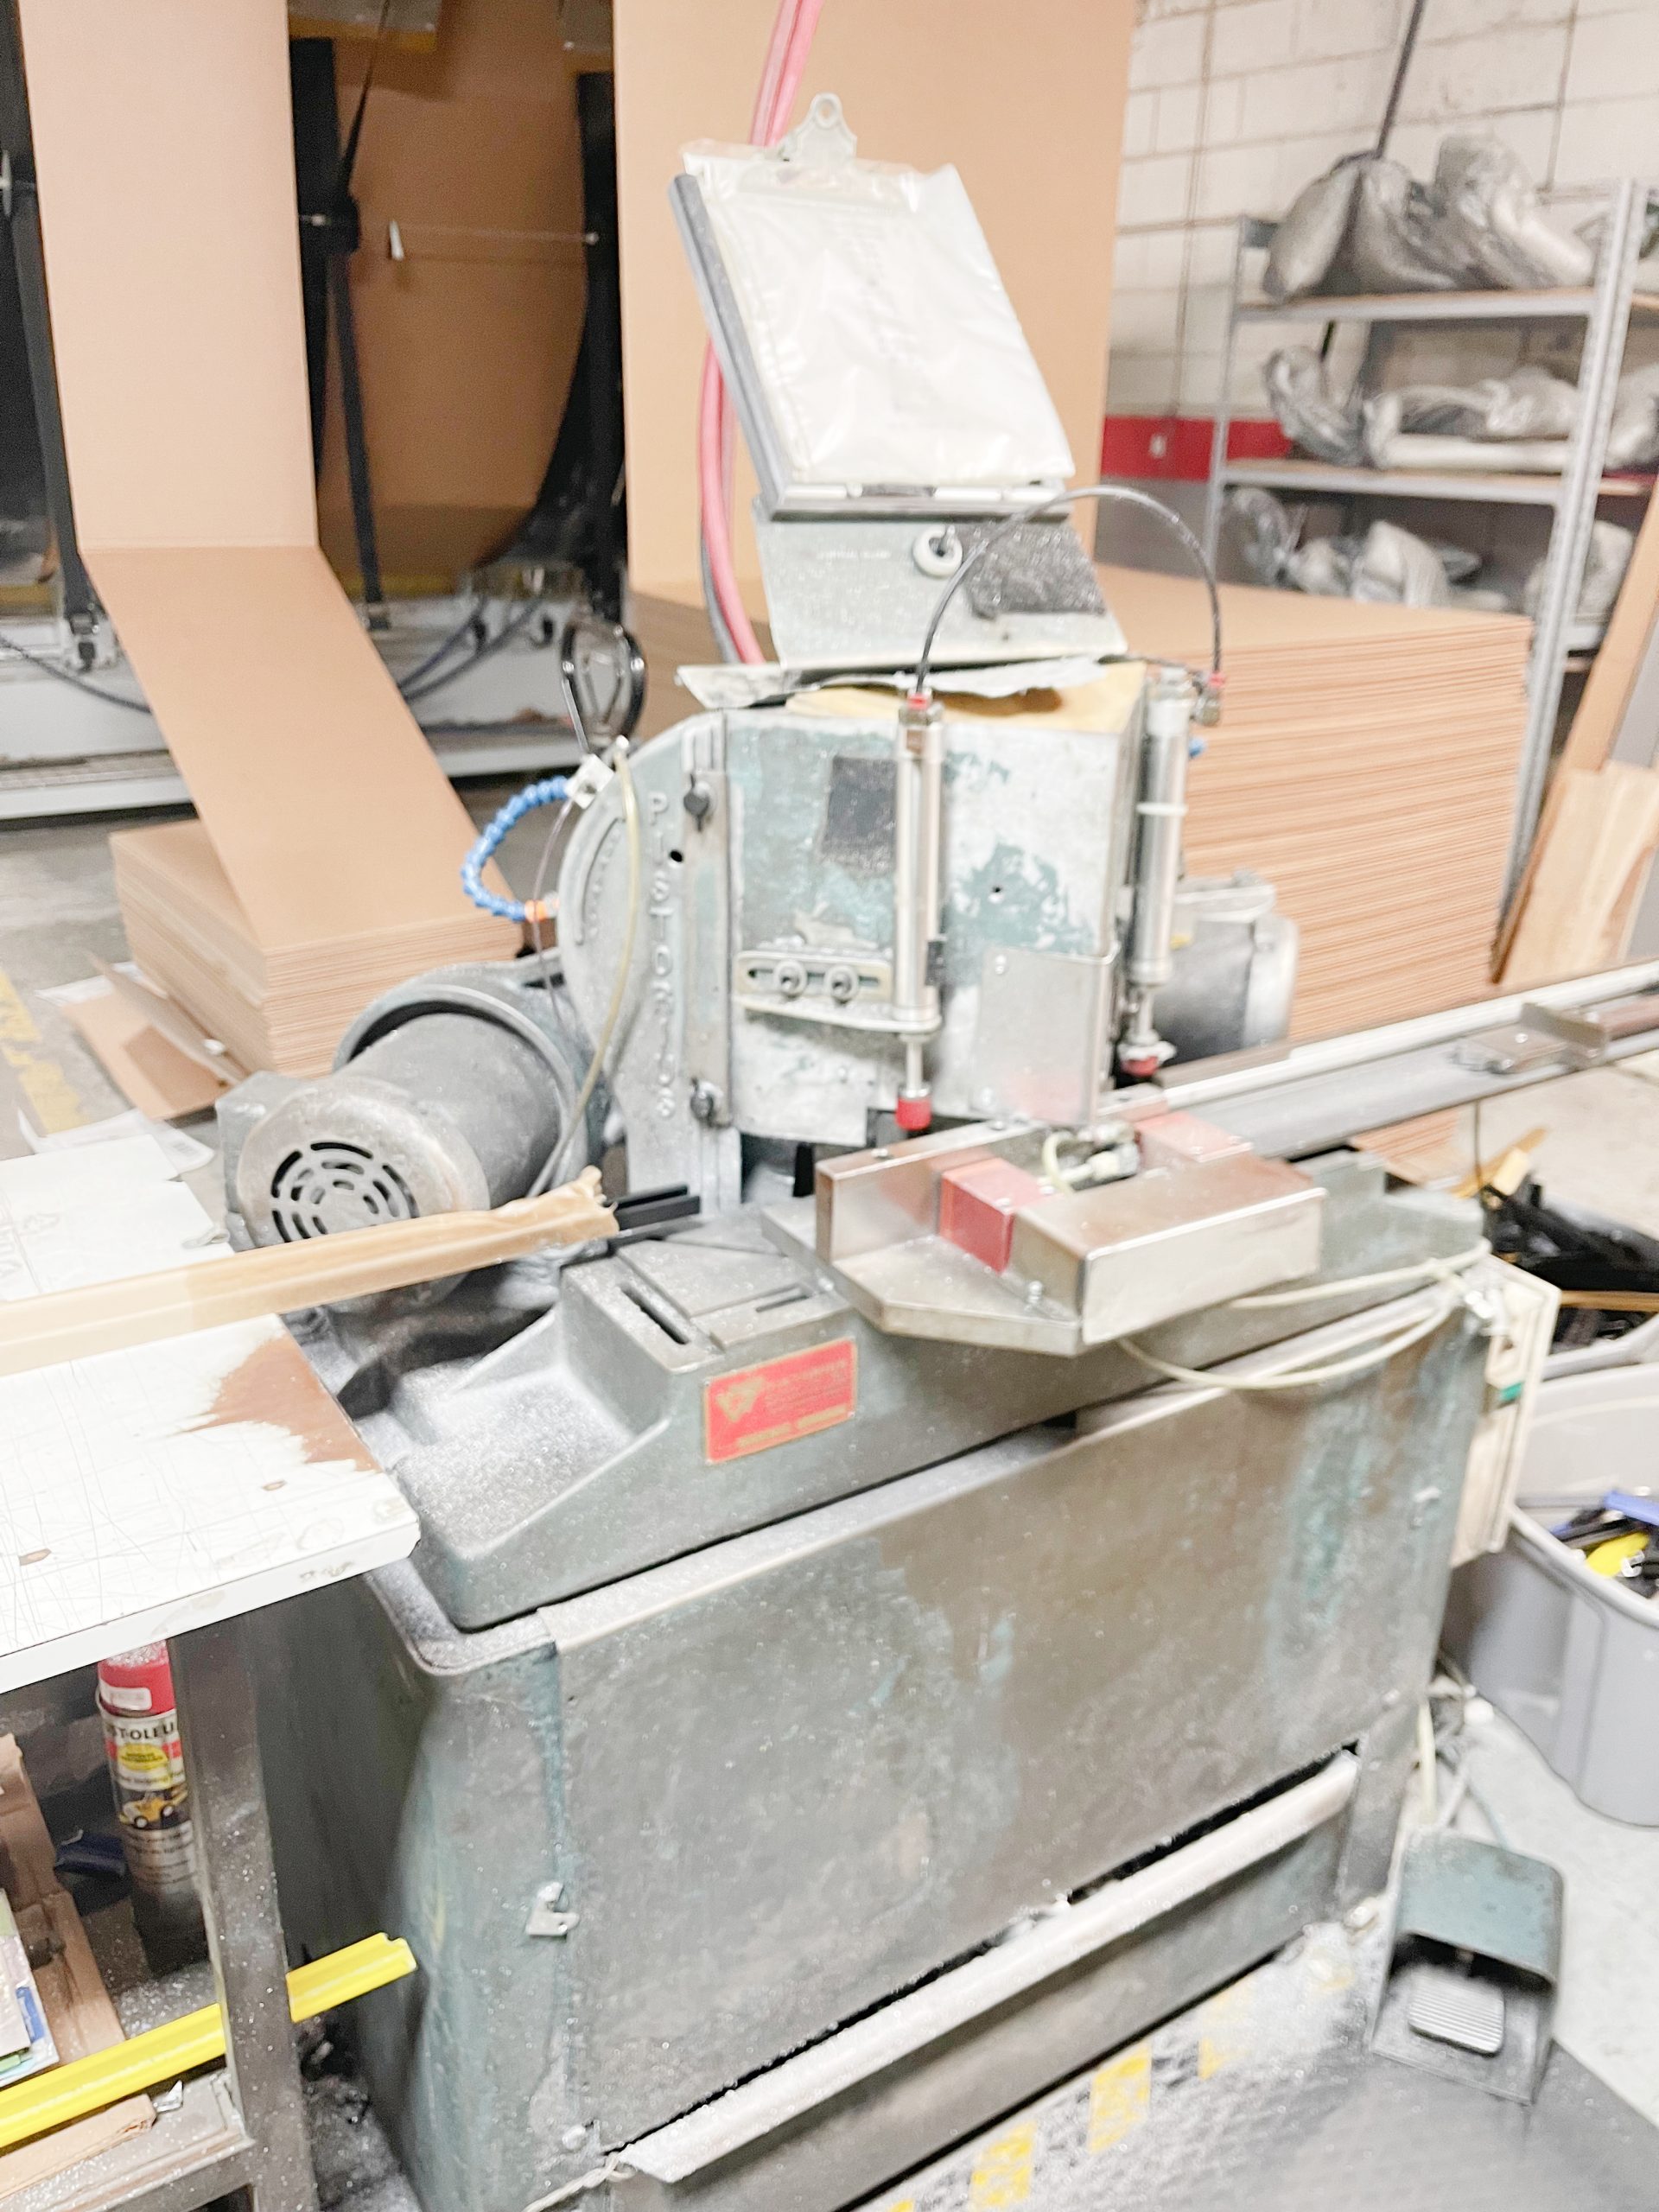 Equipment Lot: Pistorius Double Miter Saws, HeatSeal Shrink Wrap System, Wizard Eclipse Duo Mat Cutter & Supplies (Used) Item # UE-021622A (Kentucky)